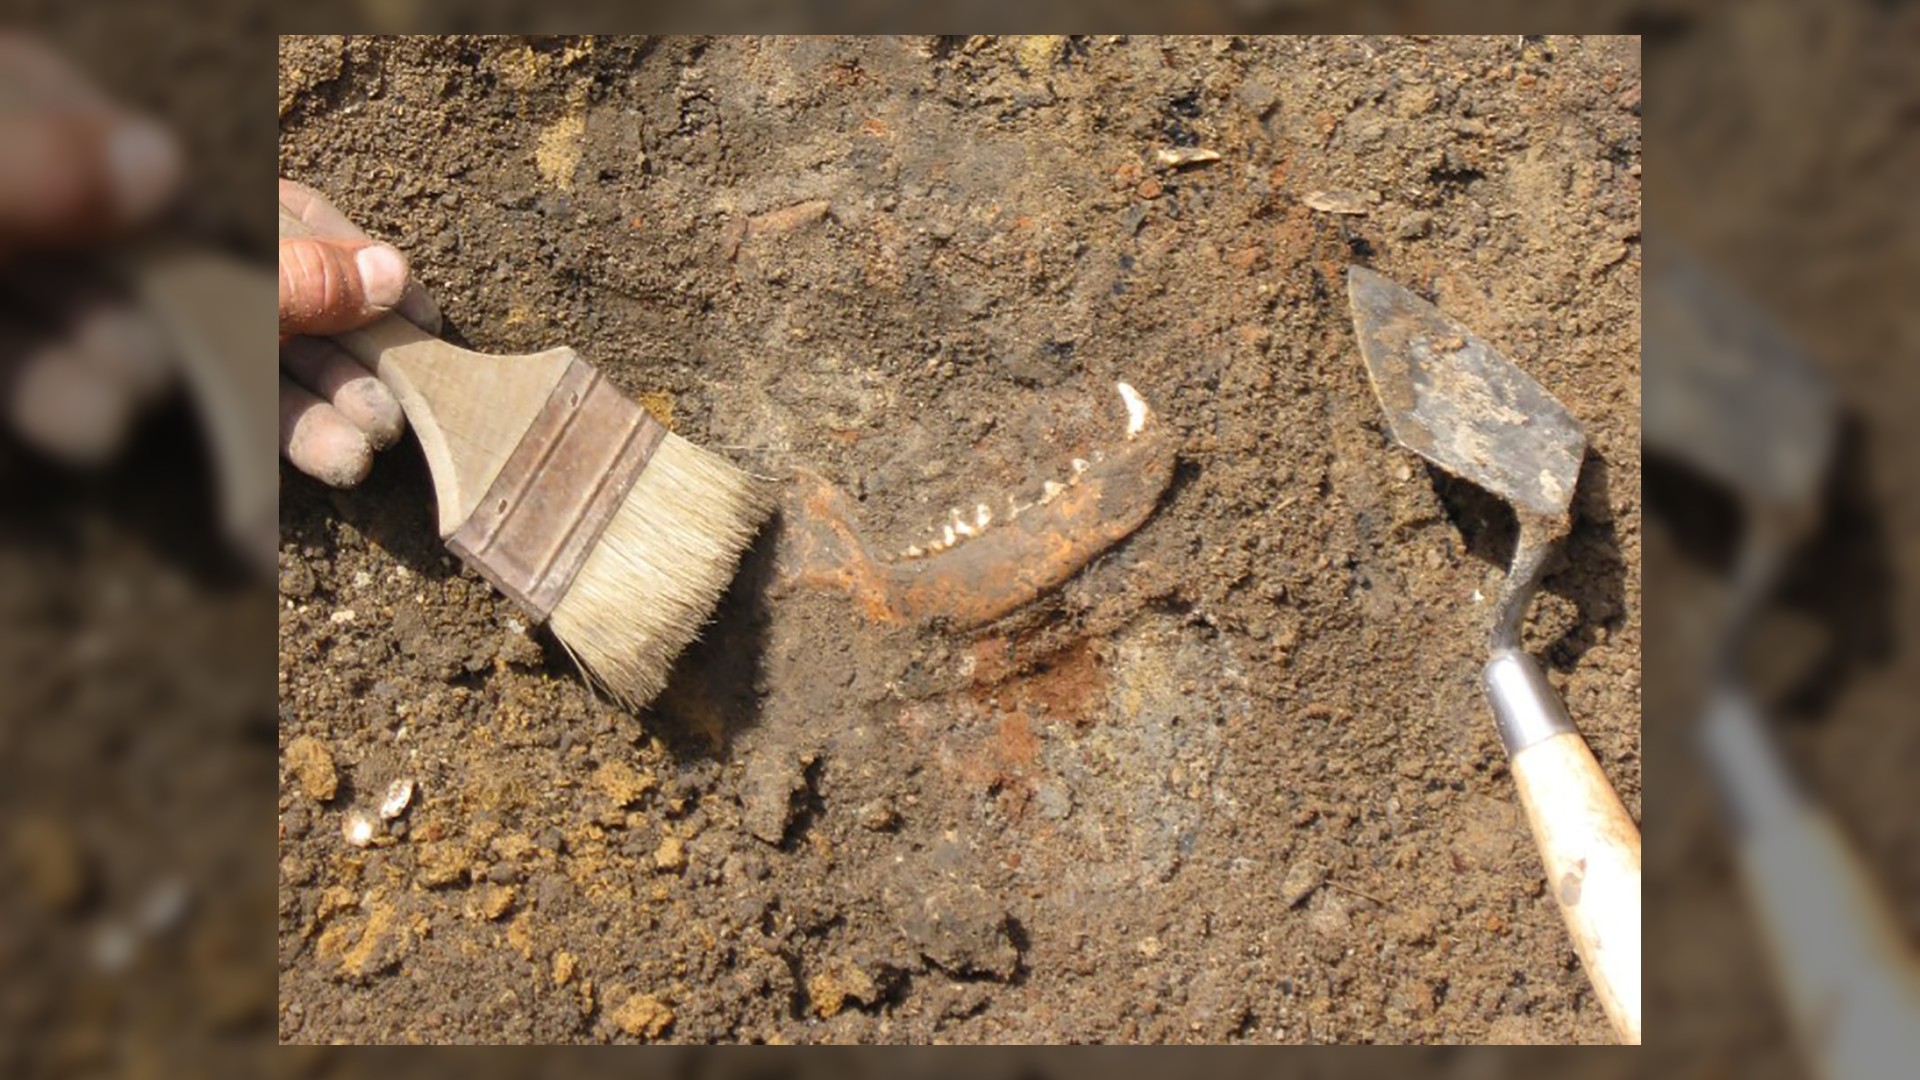 This photo shows the excavation of a dog mandible from a well of a fort at Jamestown. Photo courtesy Jamestown Rediscovery Foundation (Preservation Virginia)